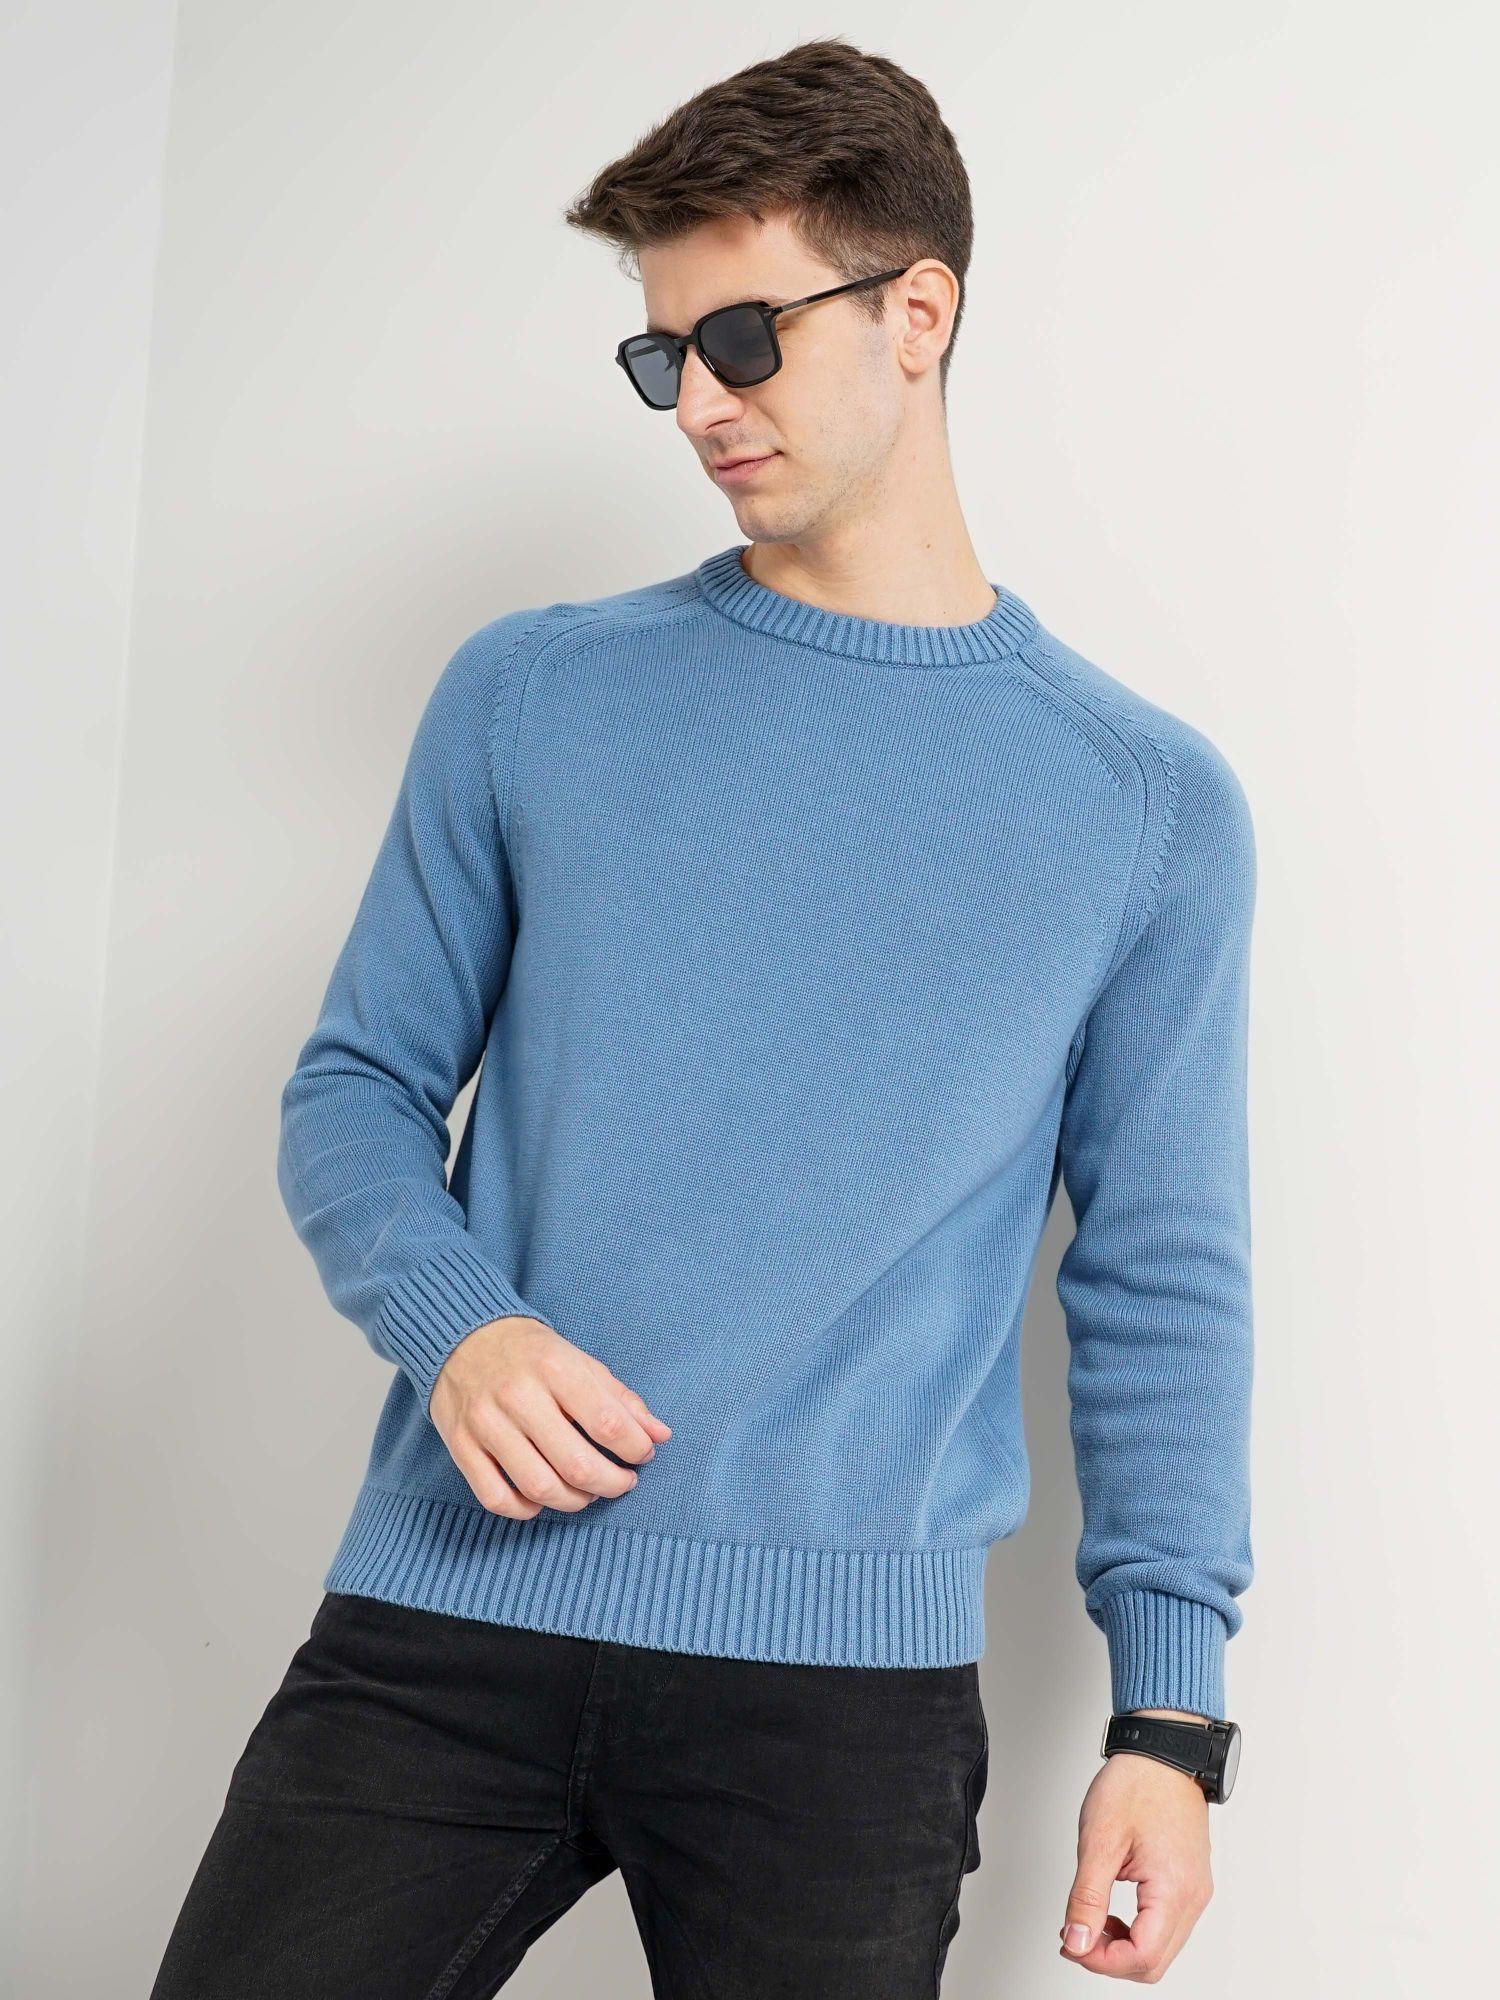 mens solid sweater